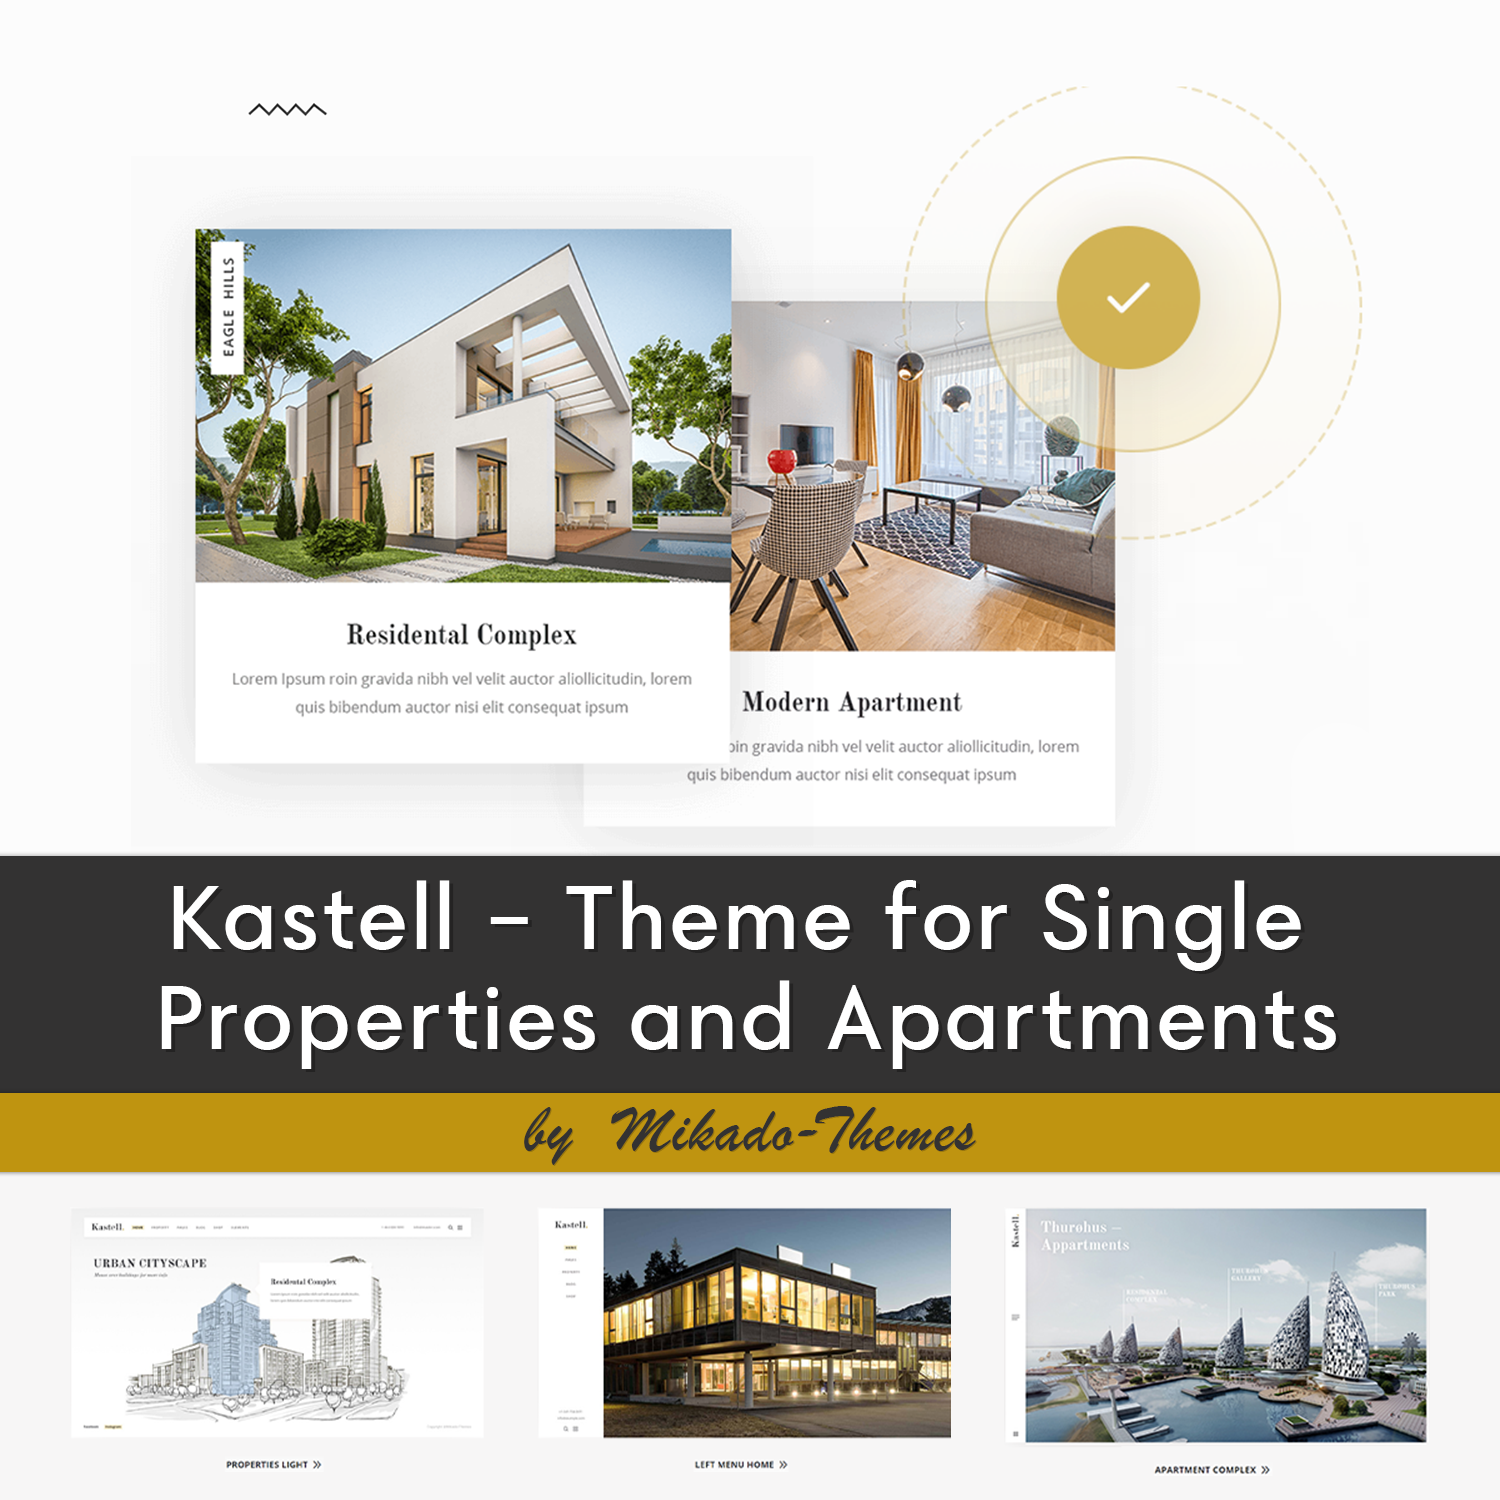 Images with kastell theme for single properties and apartments.